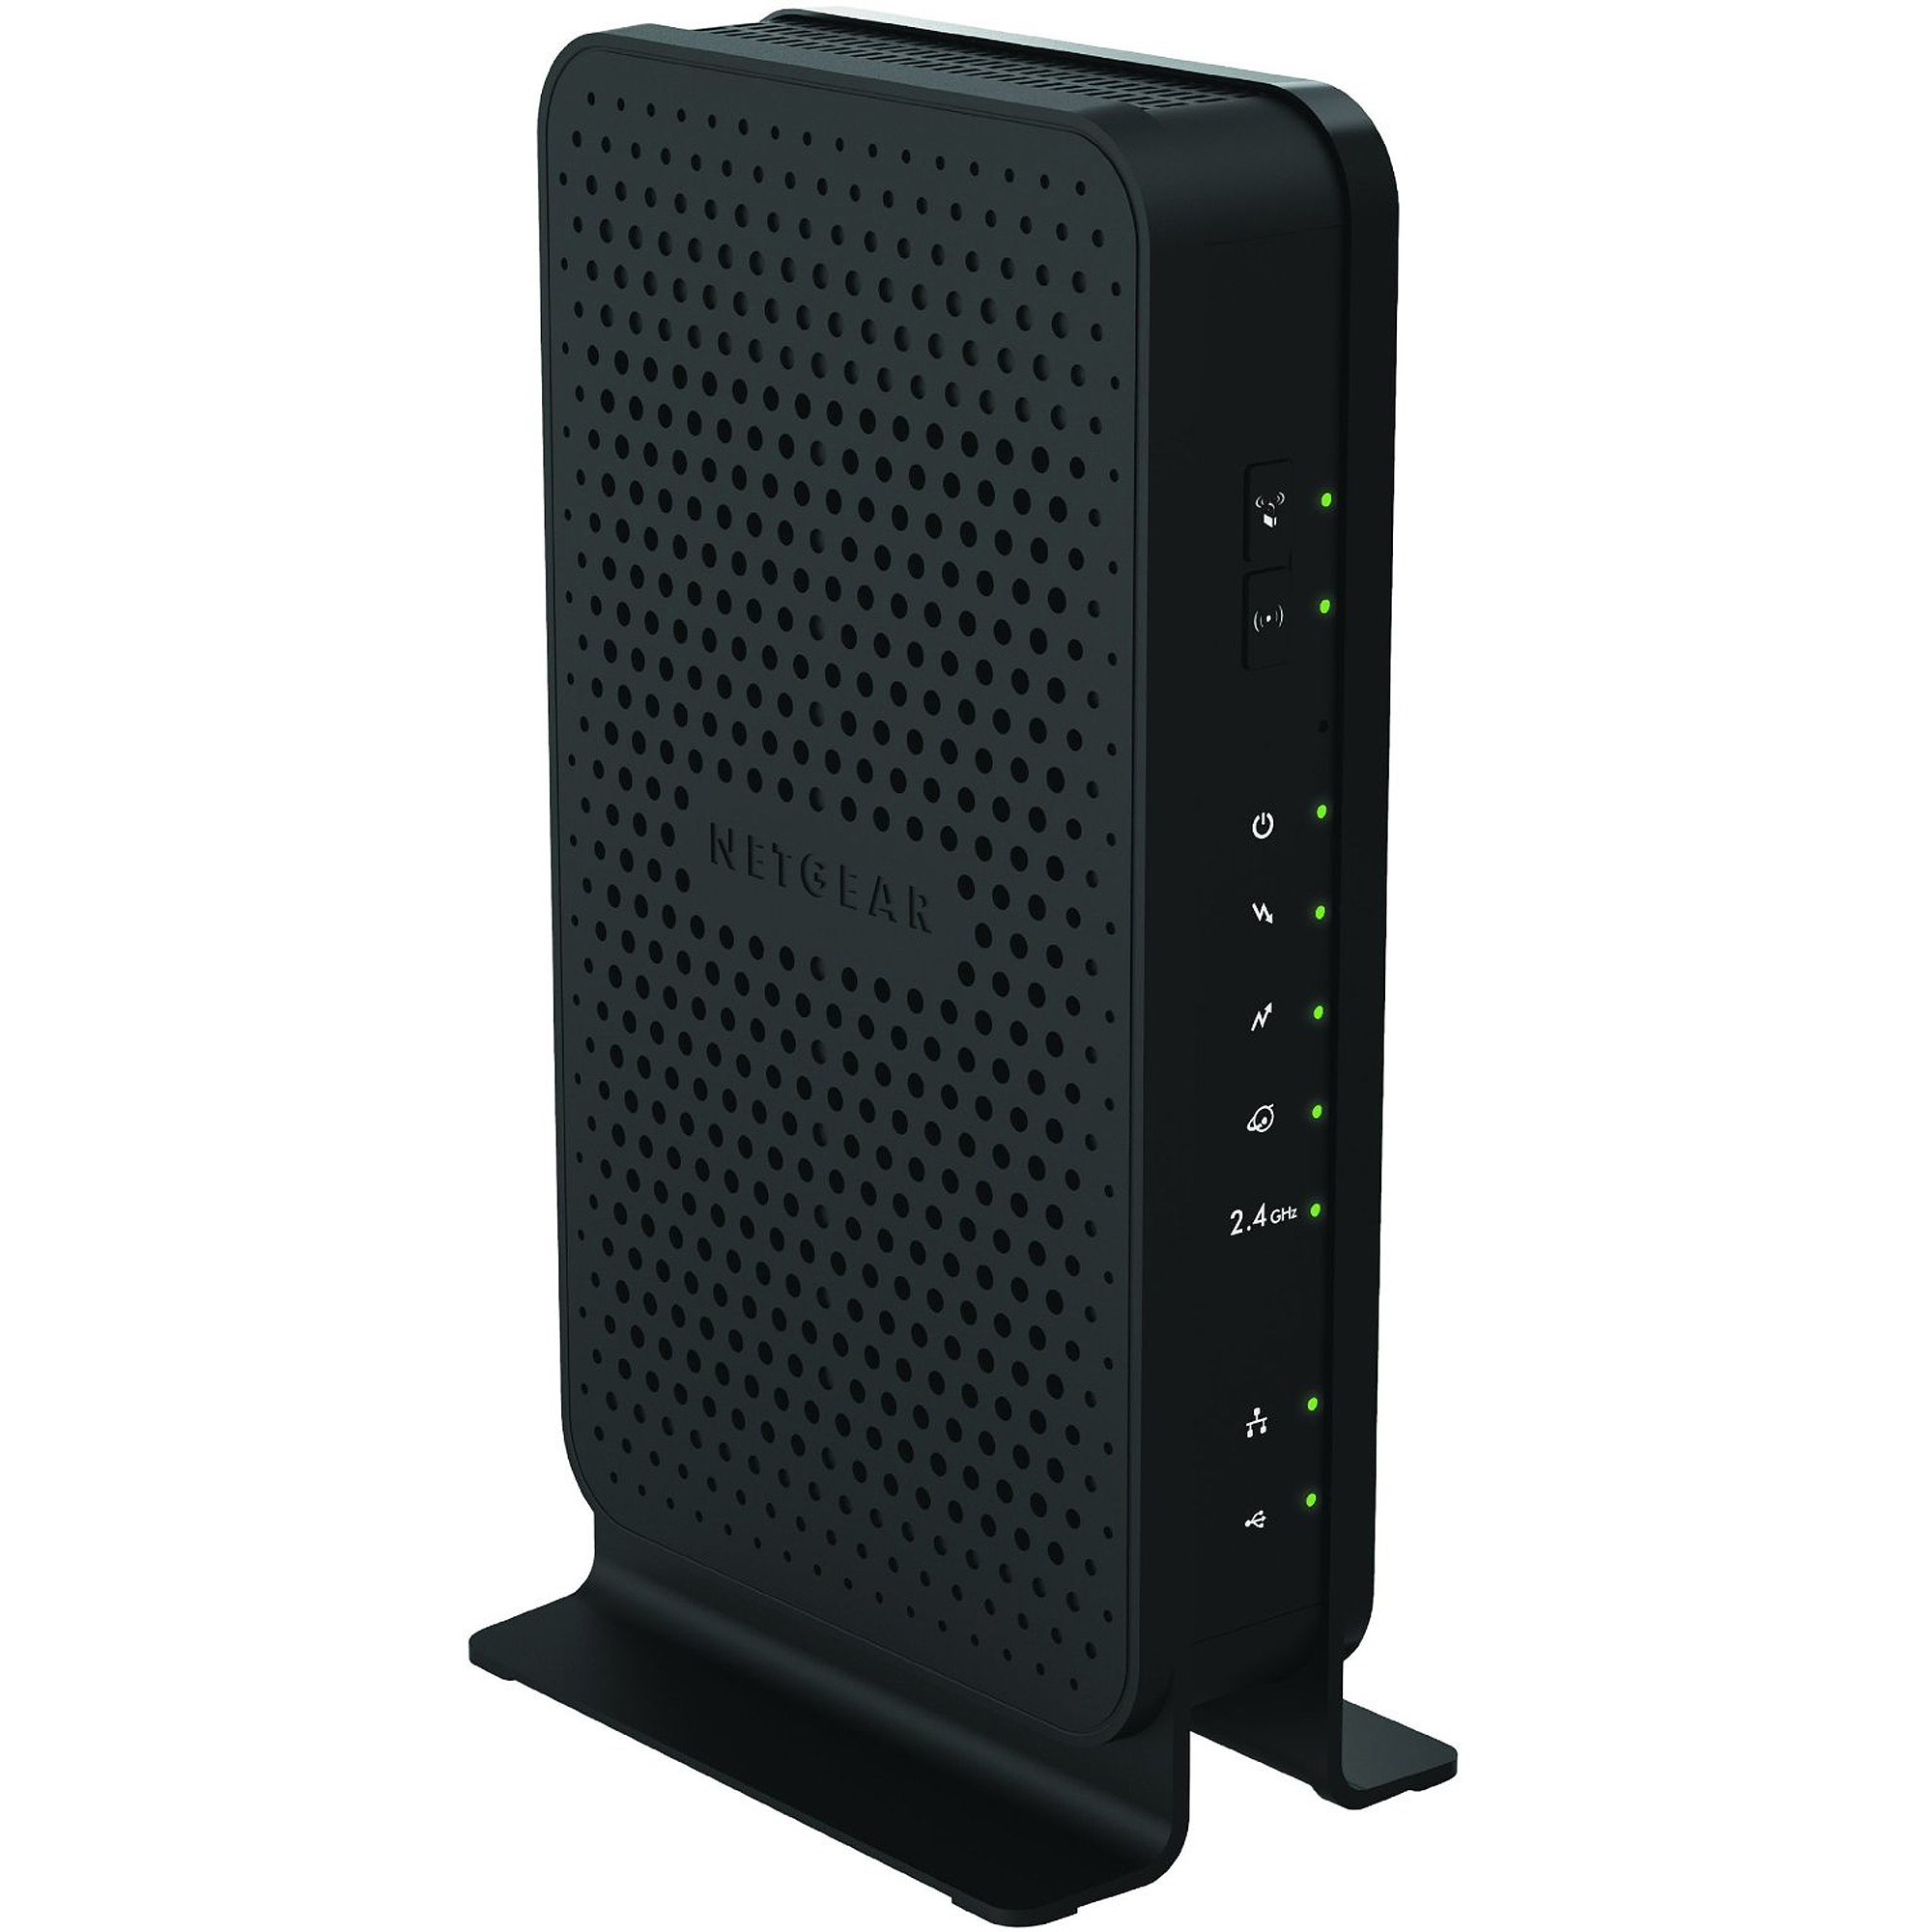 NETGEAR N300 (8x4) WiFi Cable Modem Router Combo C3000, DOCSIS 3.0 | Certified for Xfinity by Comcast, Spectrum, COX & more (C3000) - image 3 of 4